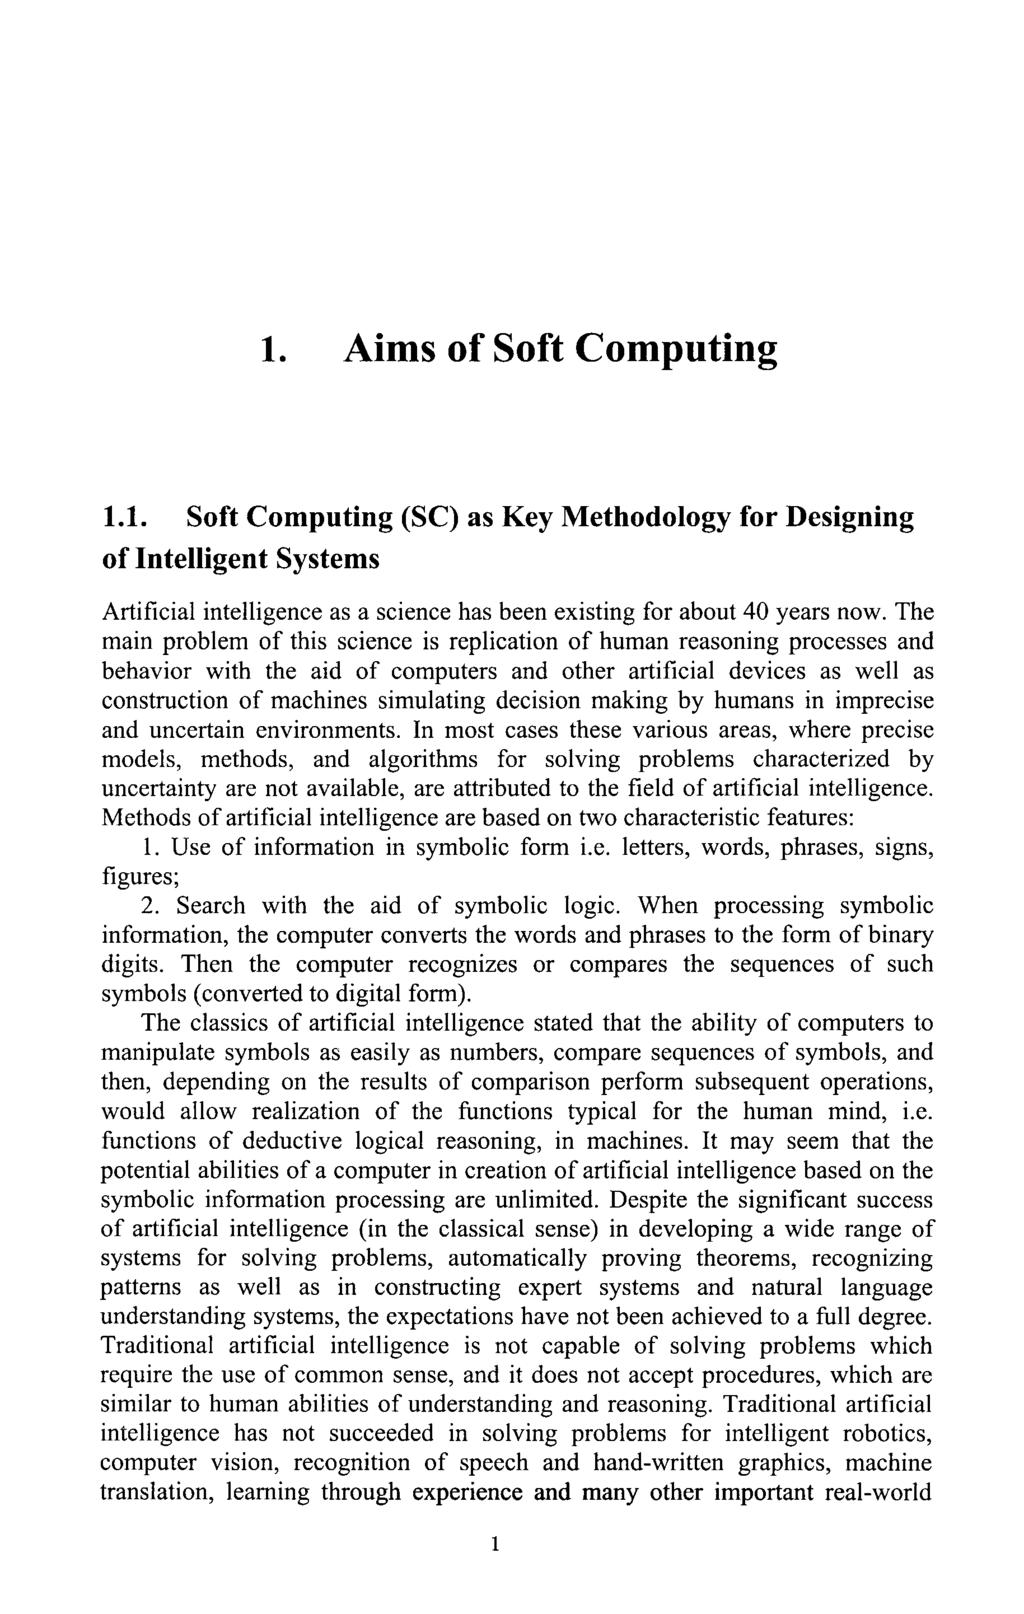 1. Aims of Soft Computing 1.1. Soft Computing (SC) as Key Methodology for Designing of Intelligent Systems Artificial intelligence as a science has been existing for about 40 years now.